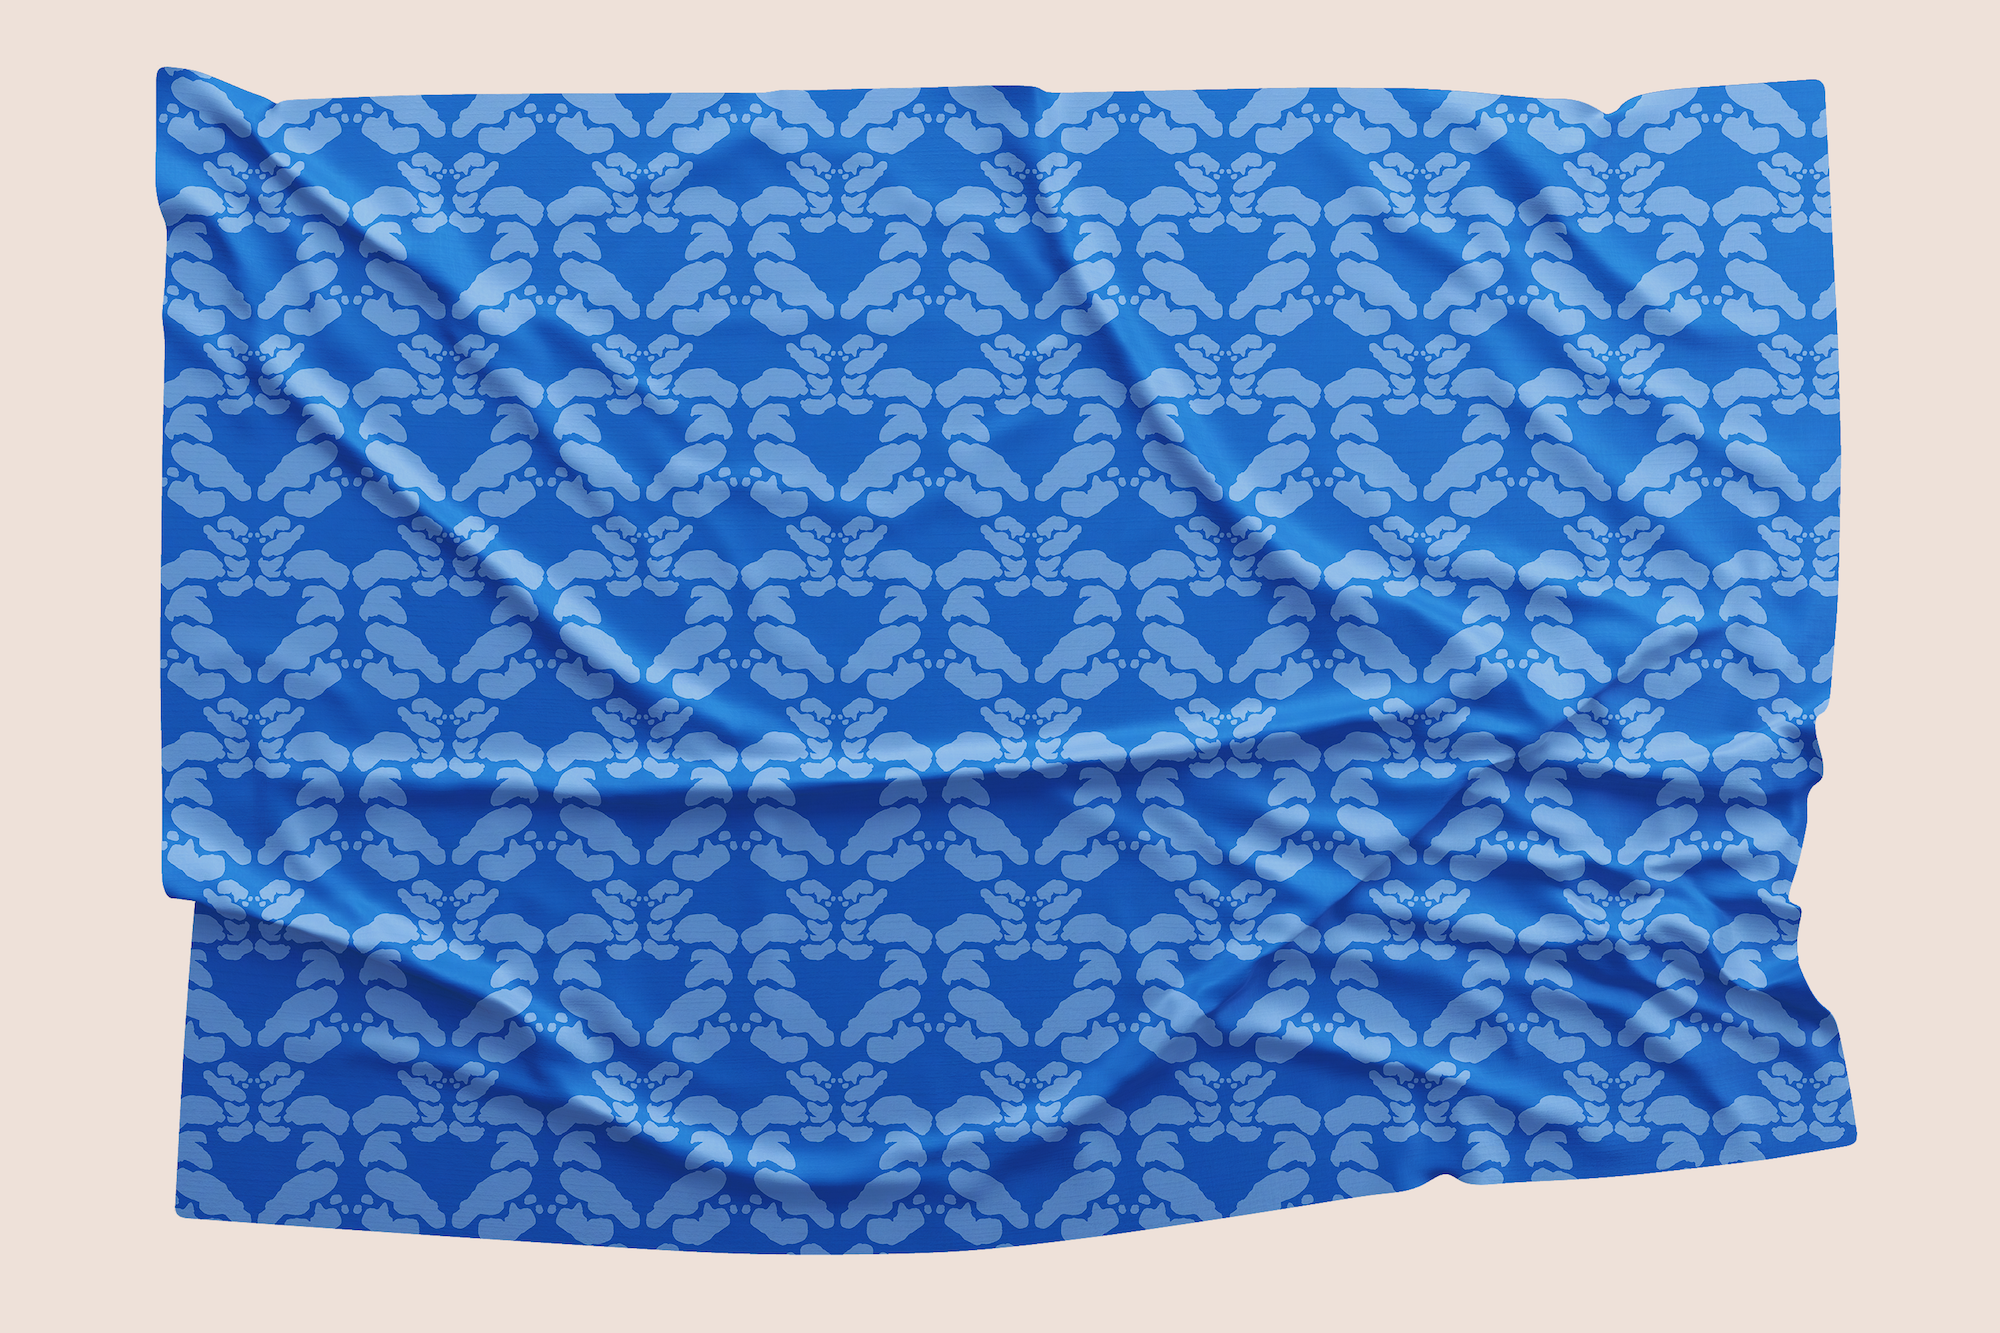 Symmetry décor in blue on blue pattern design printed on recycled fabric sustainable